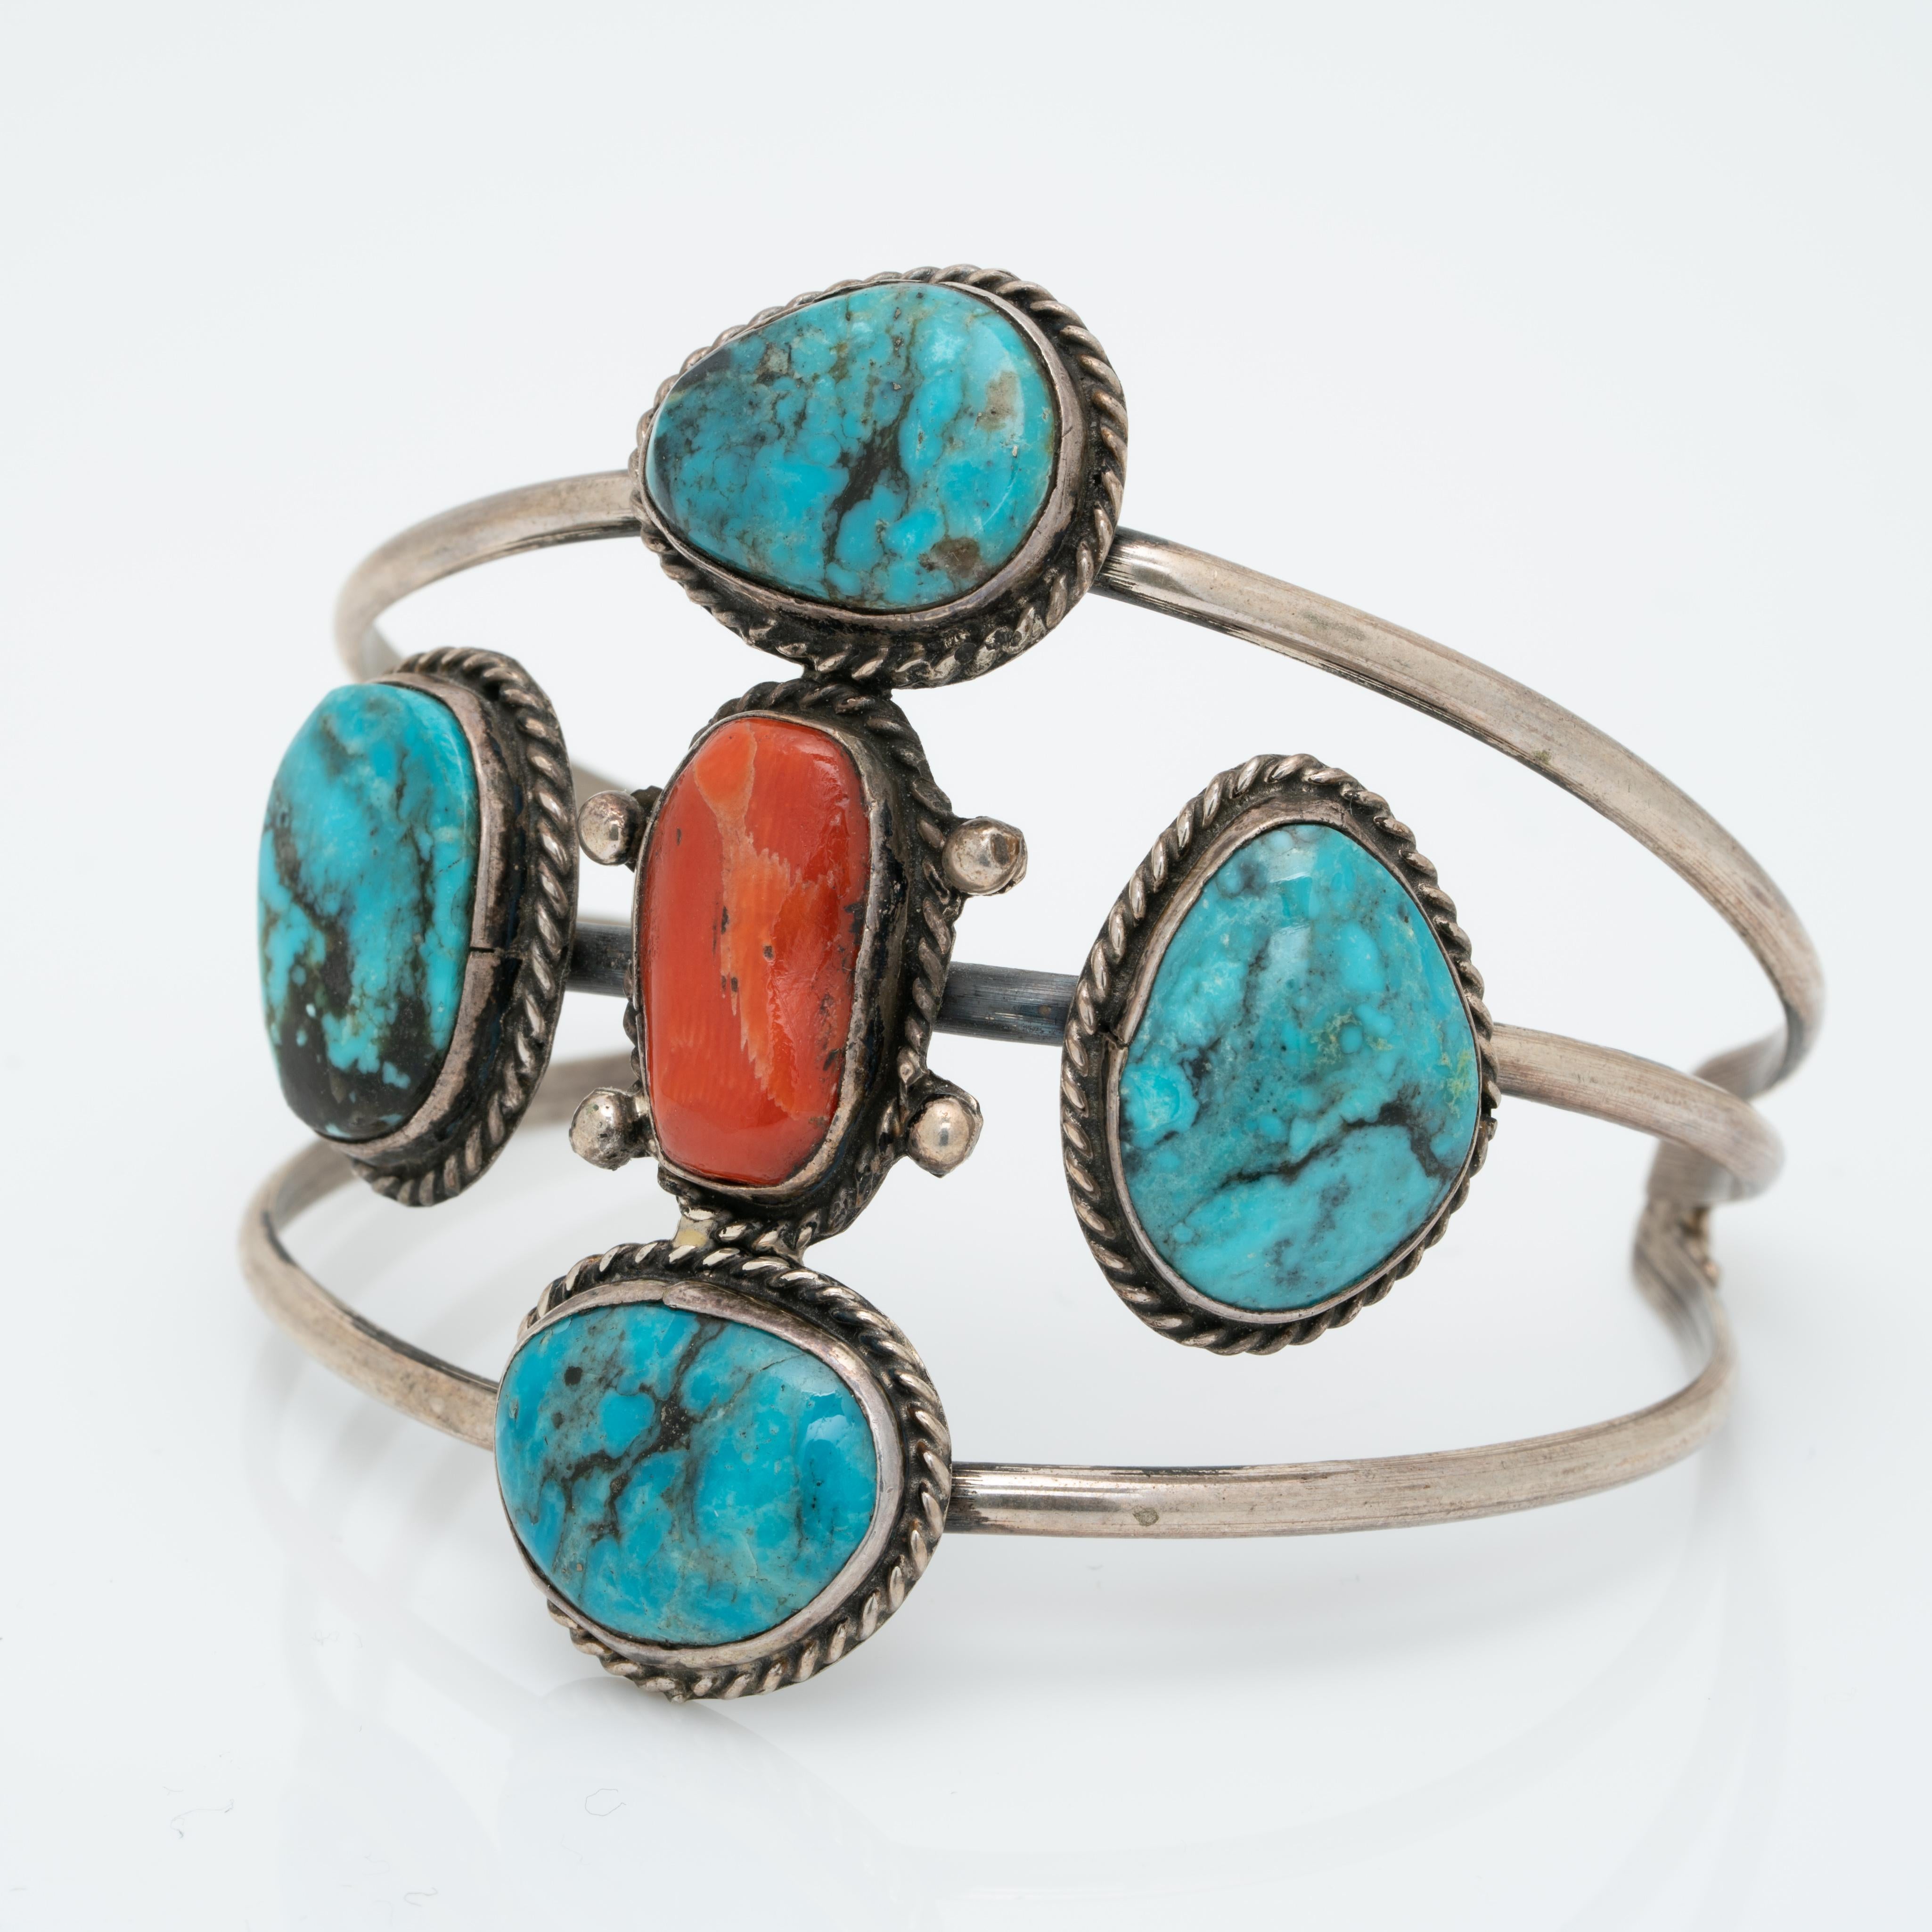 Vintage Native American Navajo Sterling Silver and Turquoise and Coral Bracelet Cuff c.1970s

Hand forged. A wonderful vintage Navajo cuff!

The patina of the silver is oxidized, we do not clean vintage and antique silver pieces as some clients